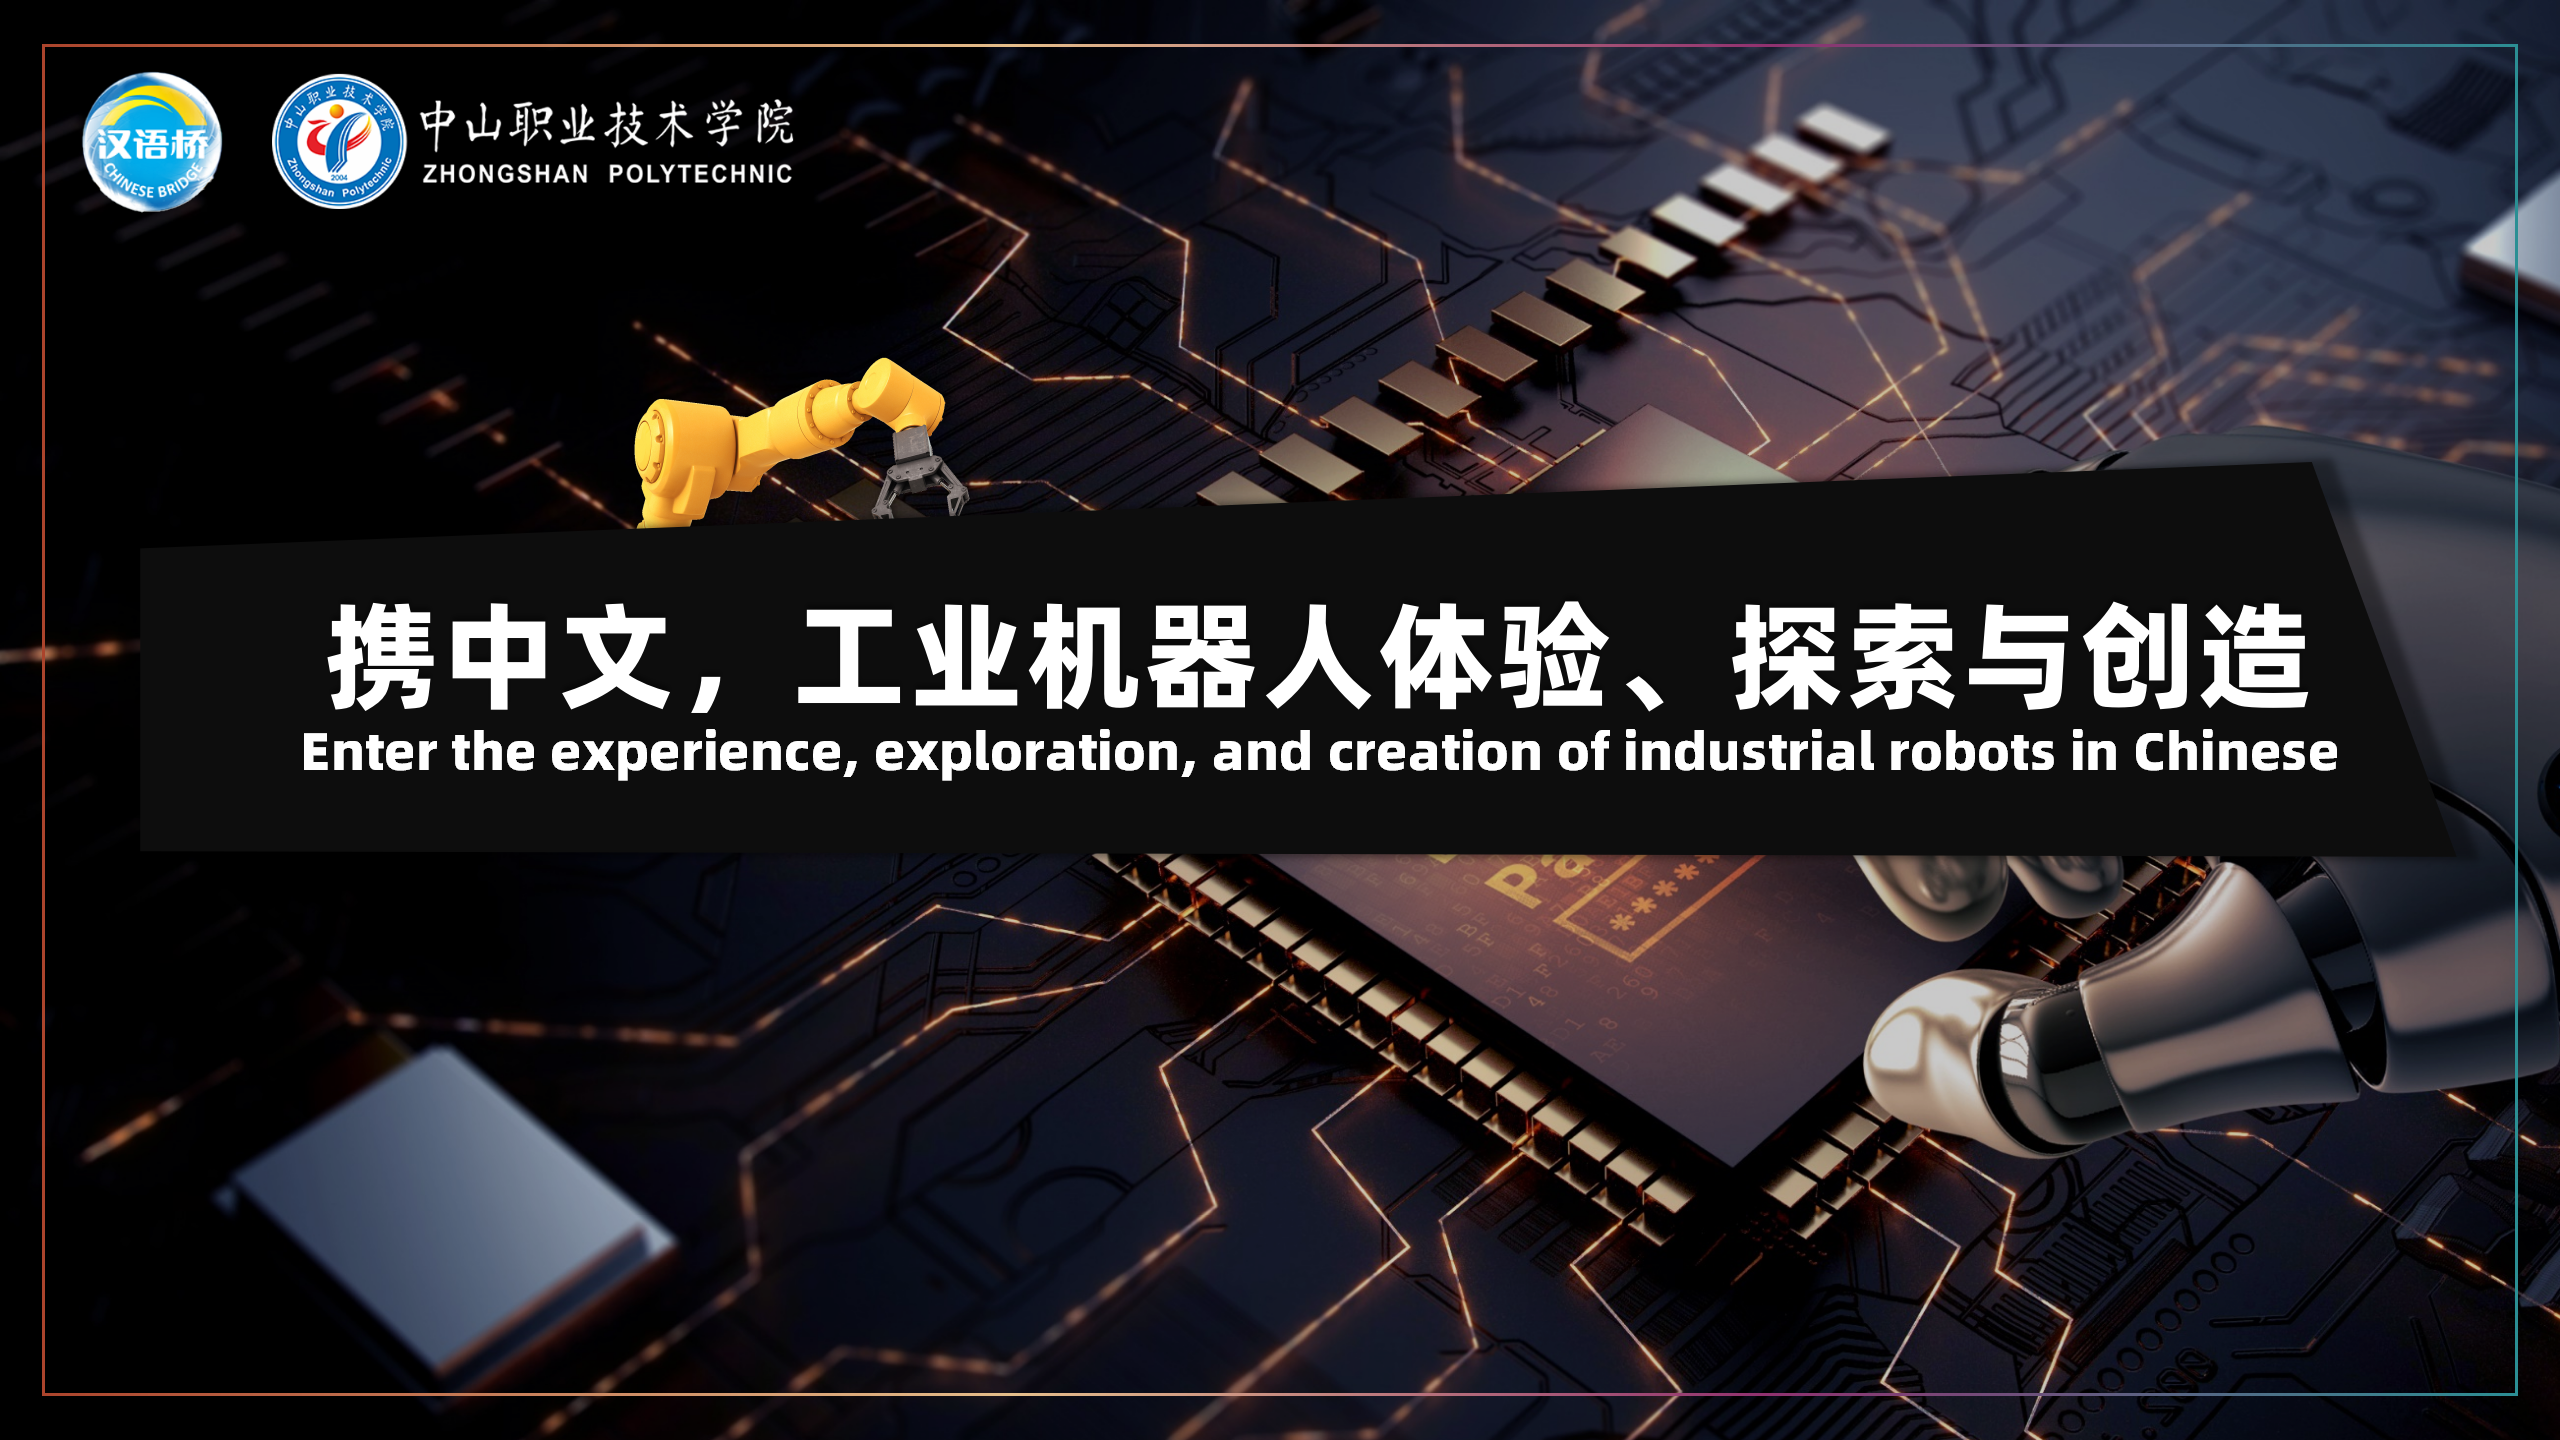 “Enter the experience,exploration,and creation of industrial robots in Chinese”